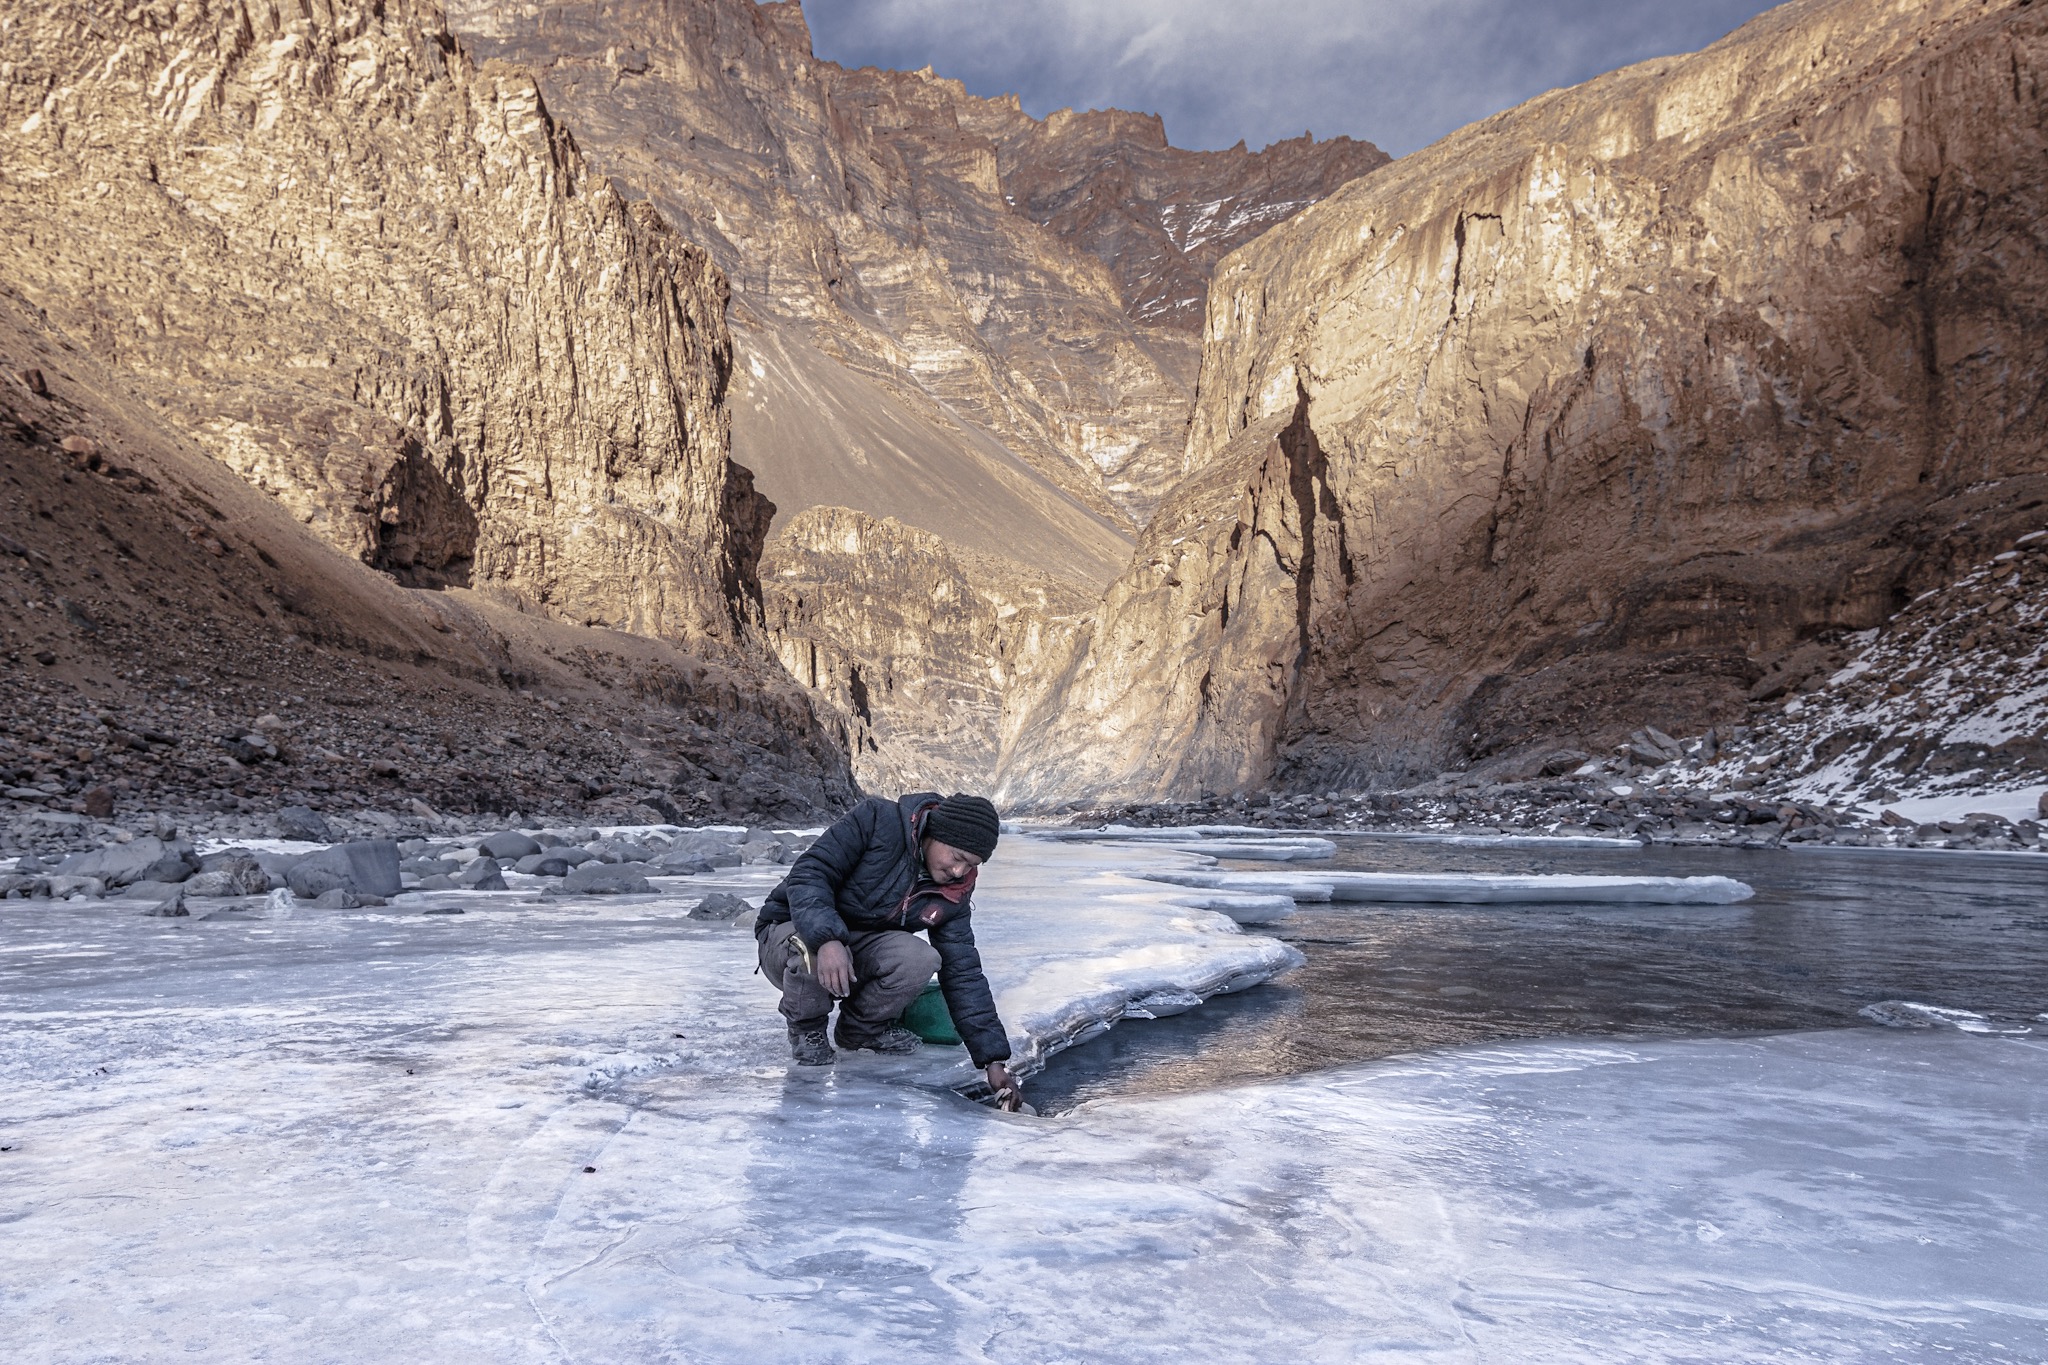 The greatest irony on the chadar is the lack of water to drink. Here, Sonam lays himself down on a sheet of ice to make the most of the thaw